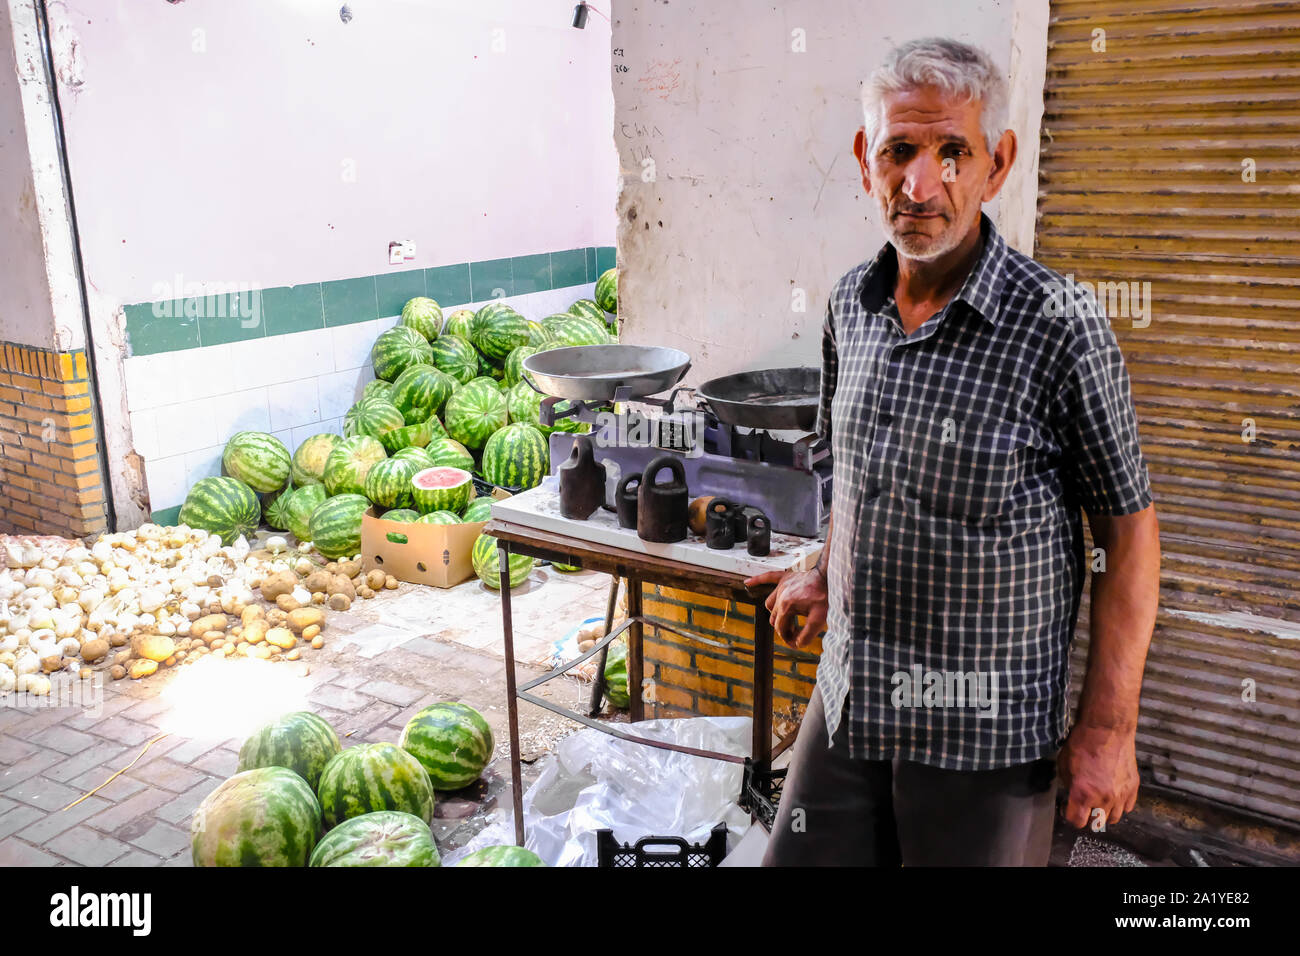 Guys Slicing Watermelon To Sell at Their Vendor at Galata District of  Istanbul Editorial Stock Photo - Image of knife, seller: 65970078